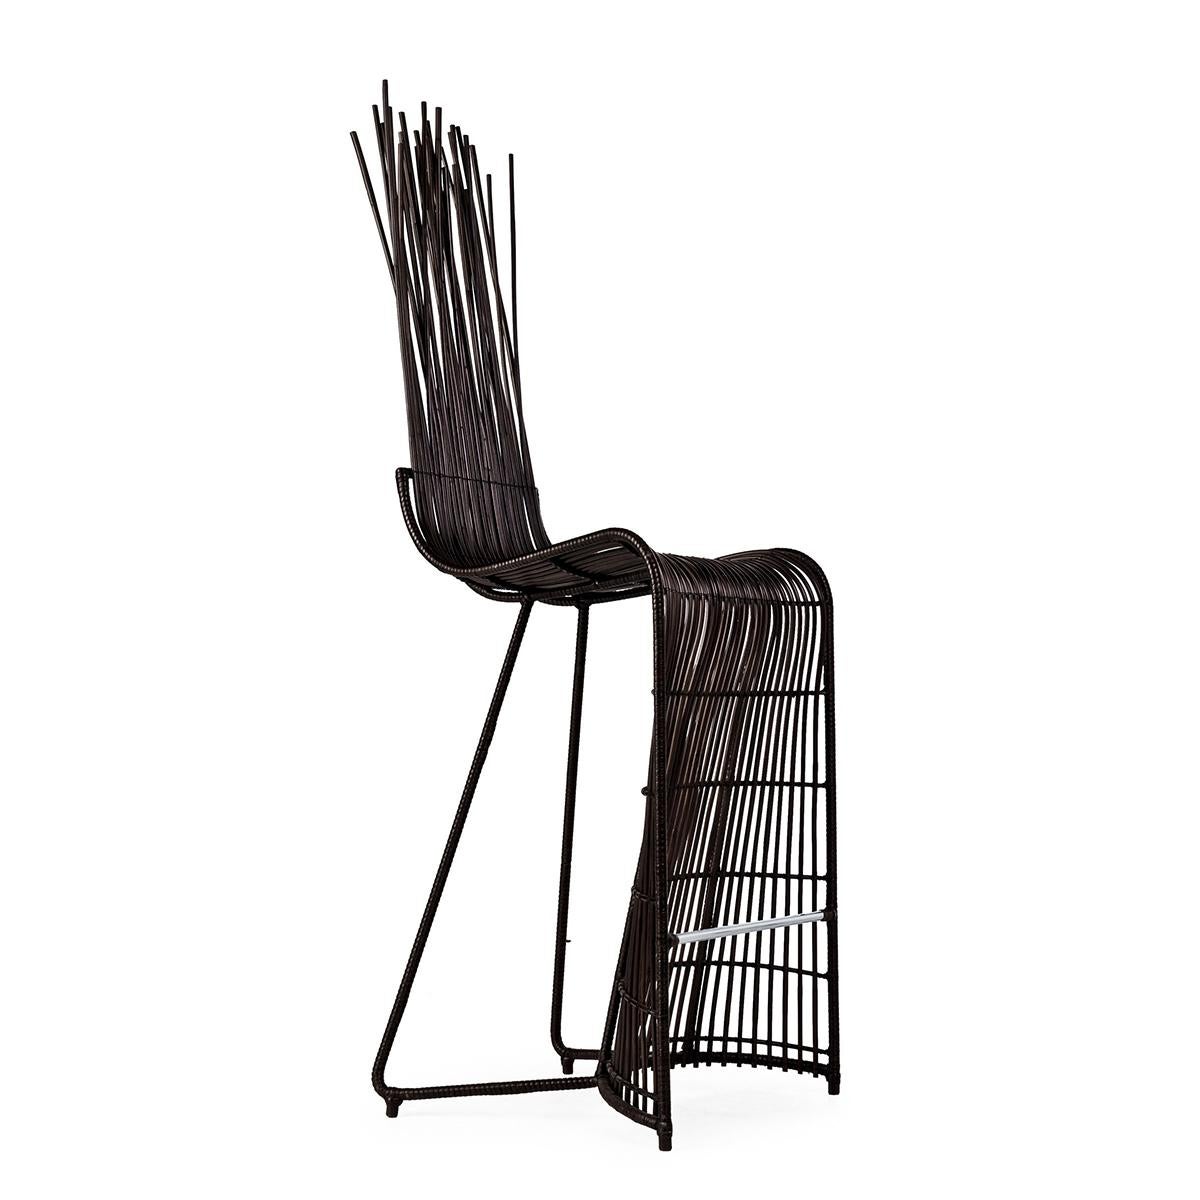 Bar stool bundle with structure in steel
with nylon and natural rattan for indoor use.
Also available with structure in steel with nylon
and pvc for outdoor use.
Available in black, or natural rattan, or green,
or red finish.
Lead time